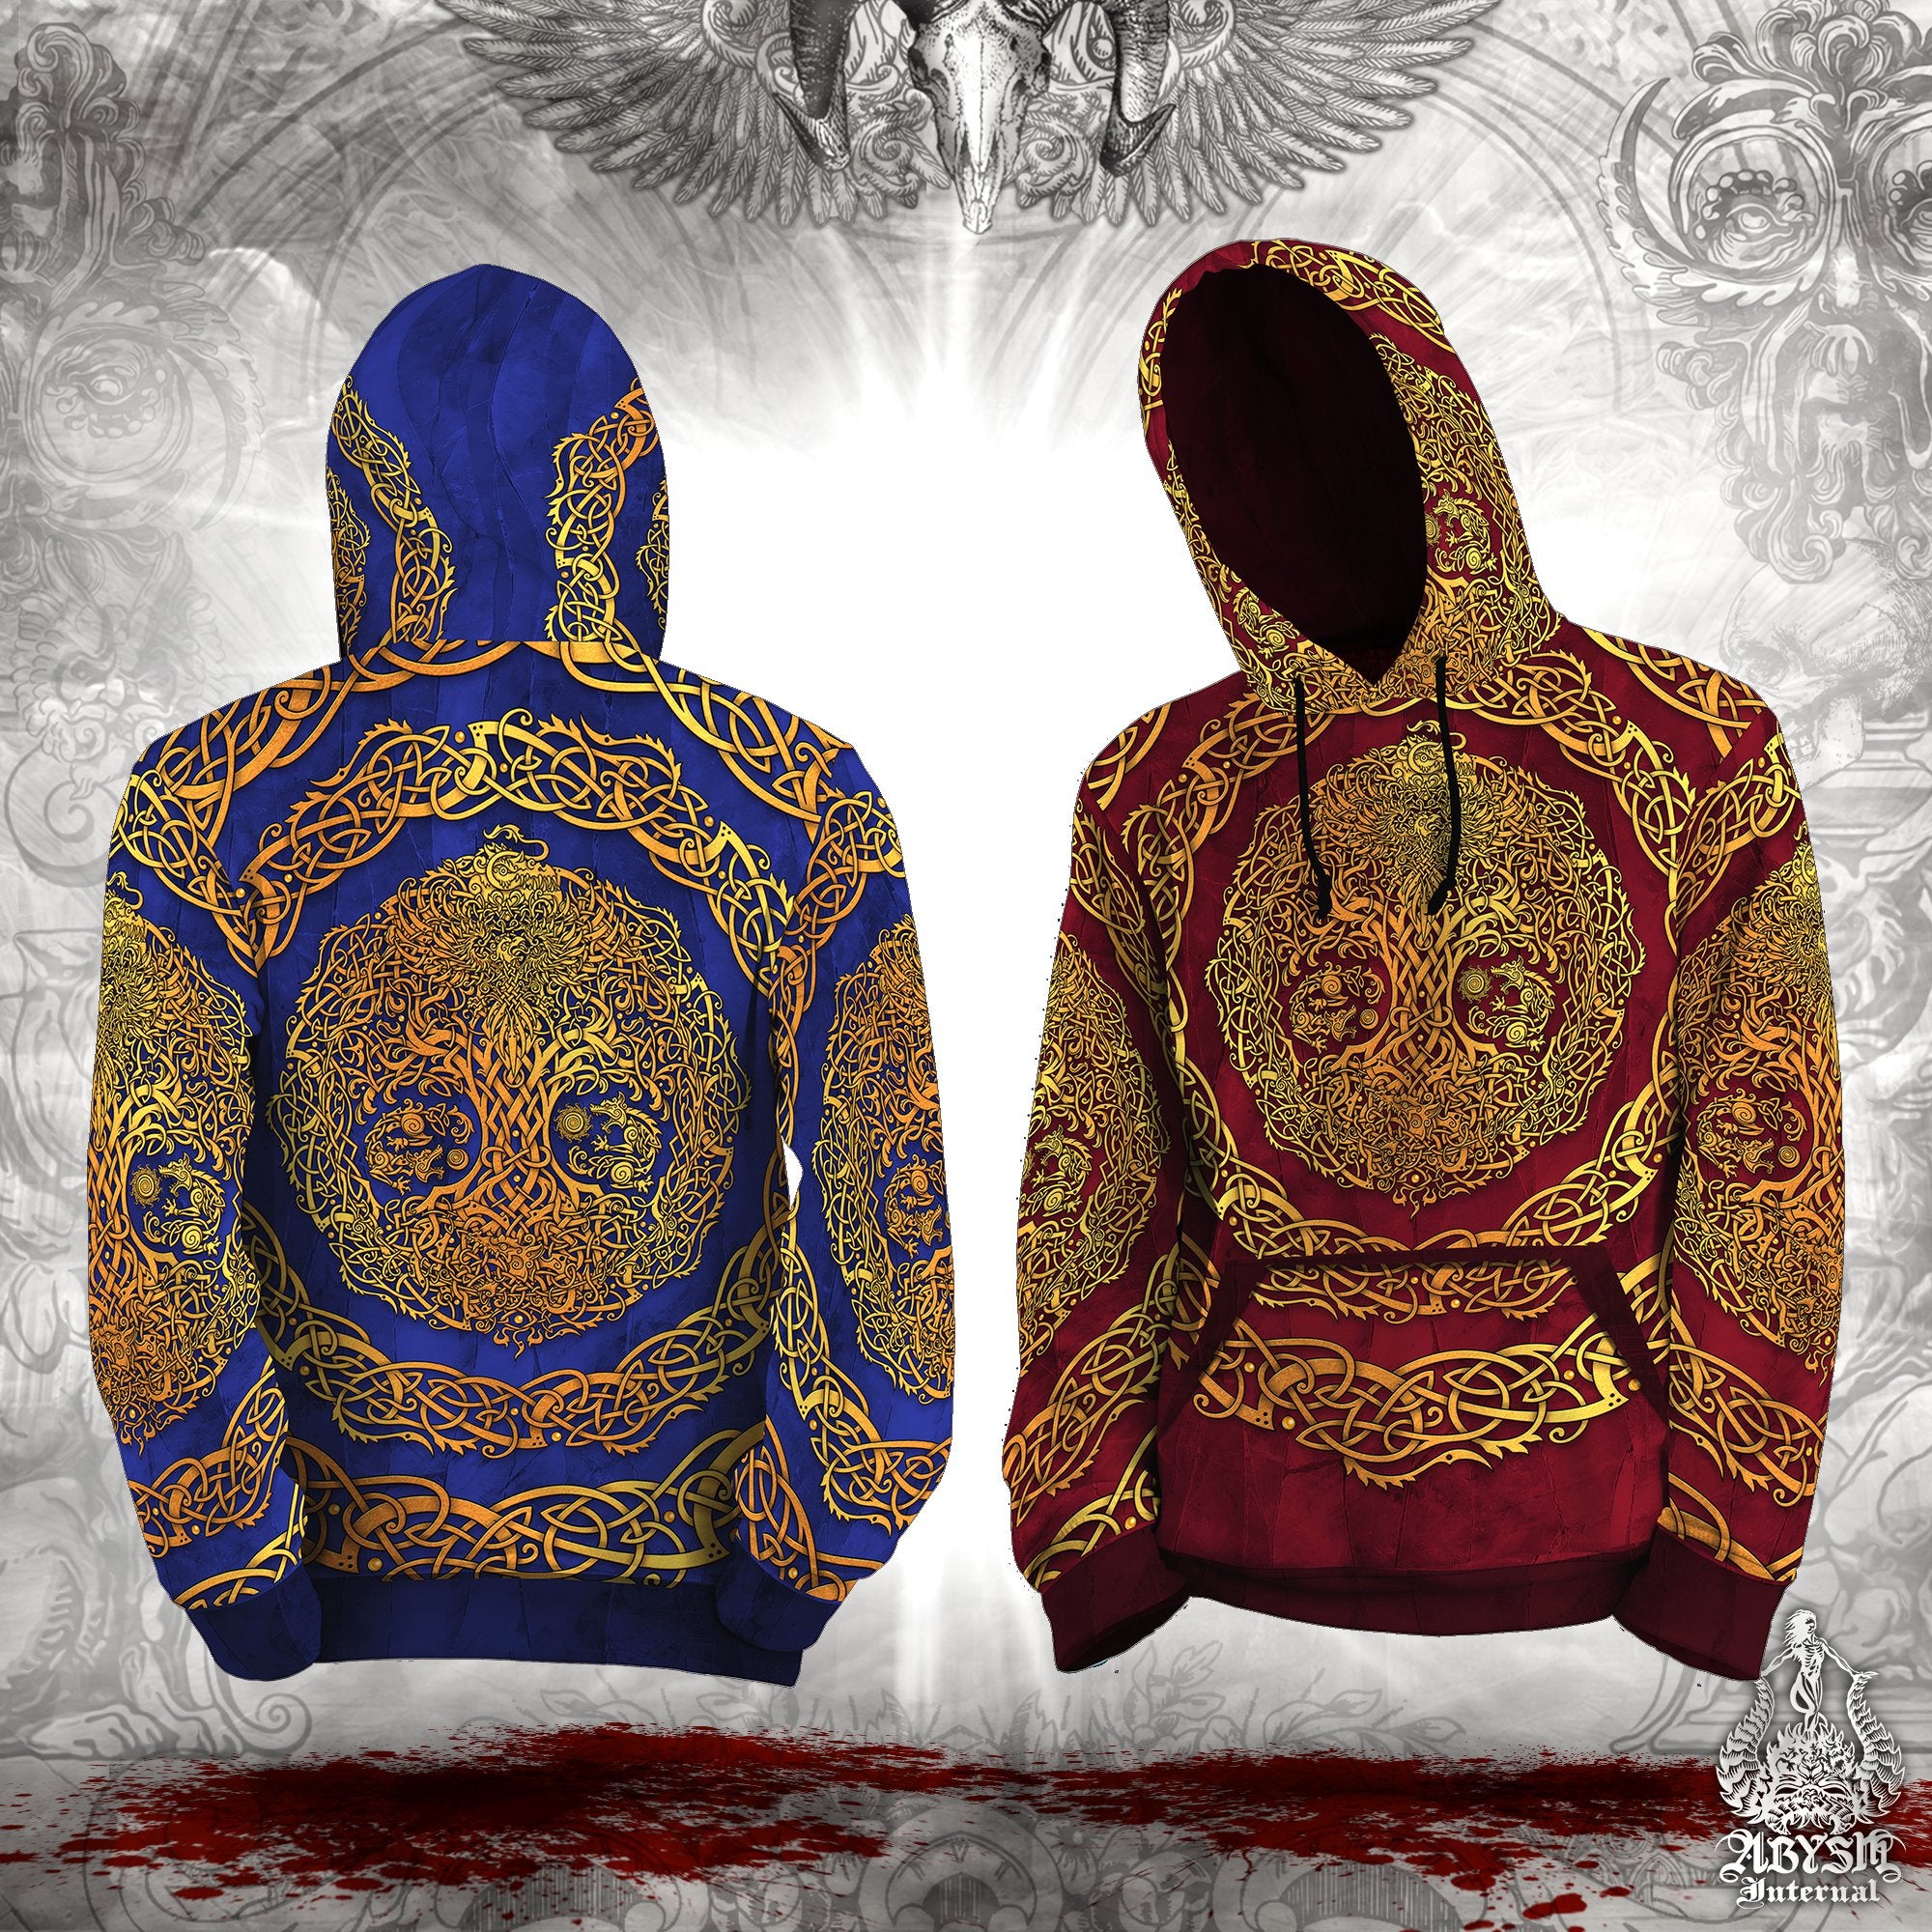 Gold Yggdrasil Pullover, Nordic Art Hoodie, Viking Sweater, Norse Street Outfit, Tree of Life Streetwear, Alternative Clothing, Unisex - Red, Blue or Black, 3 Colors - Abysm Internal